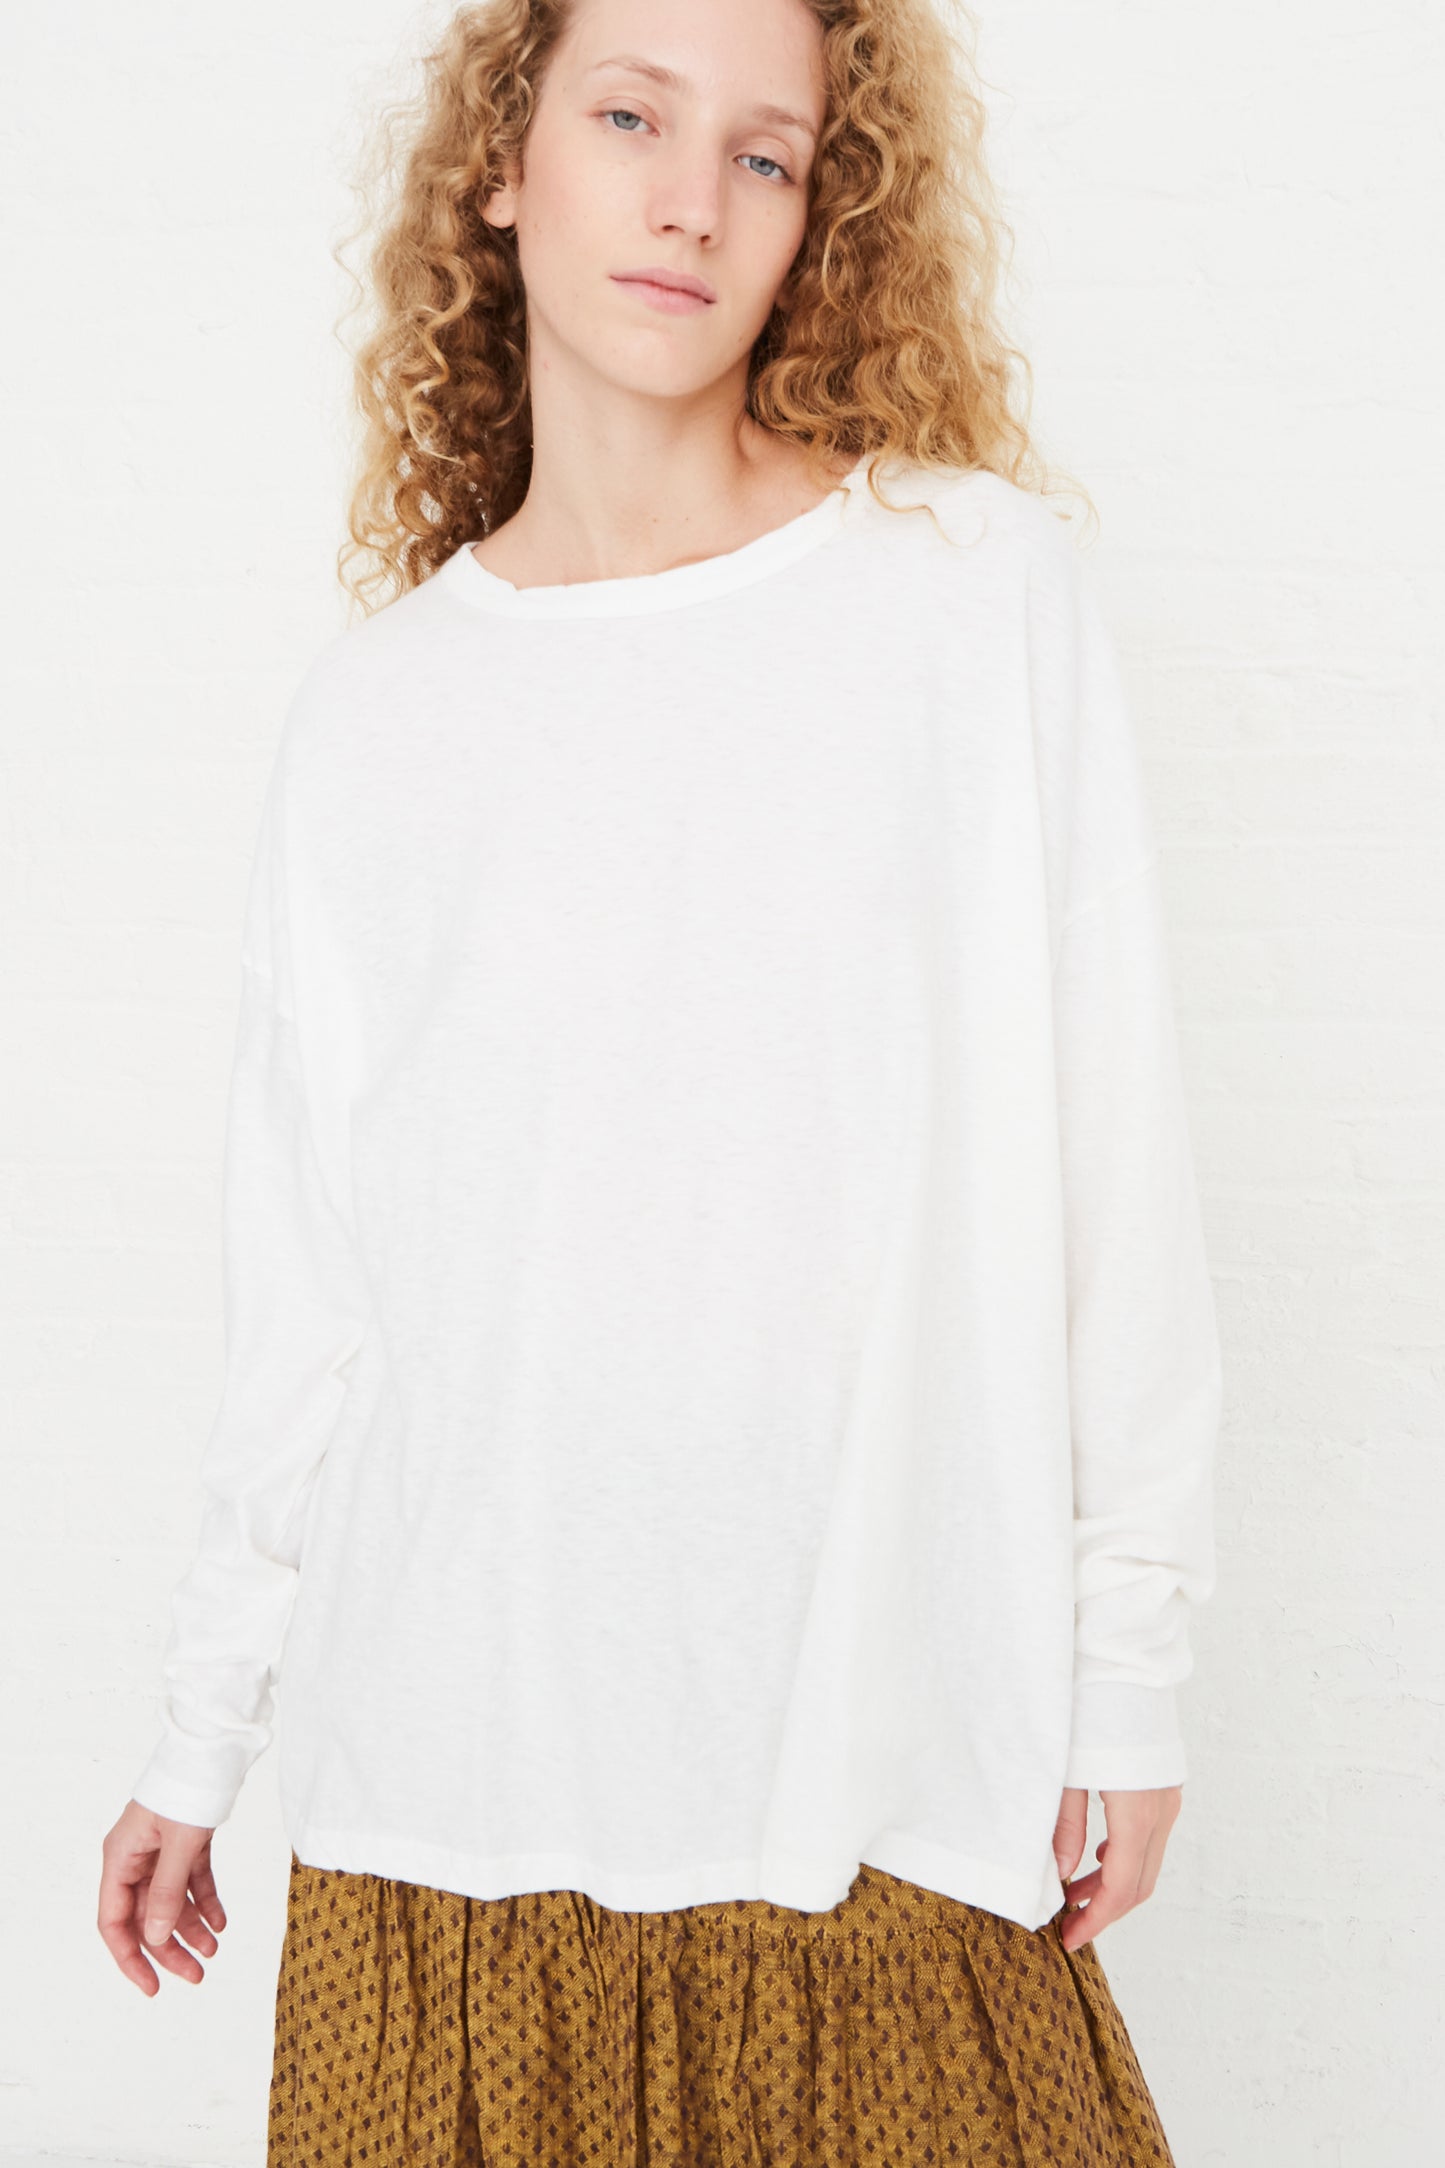 The model is wearing an Ichi Antiquités Cotton Loose Pullover in White.